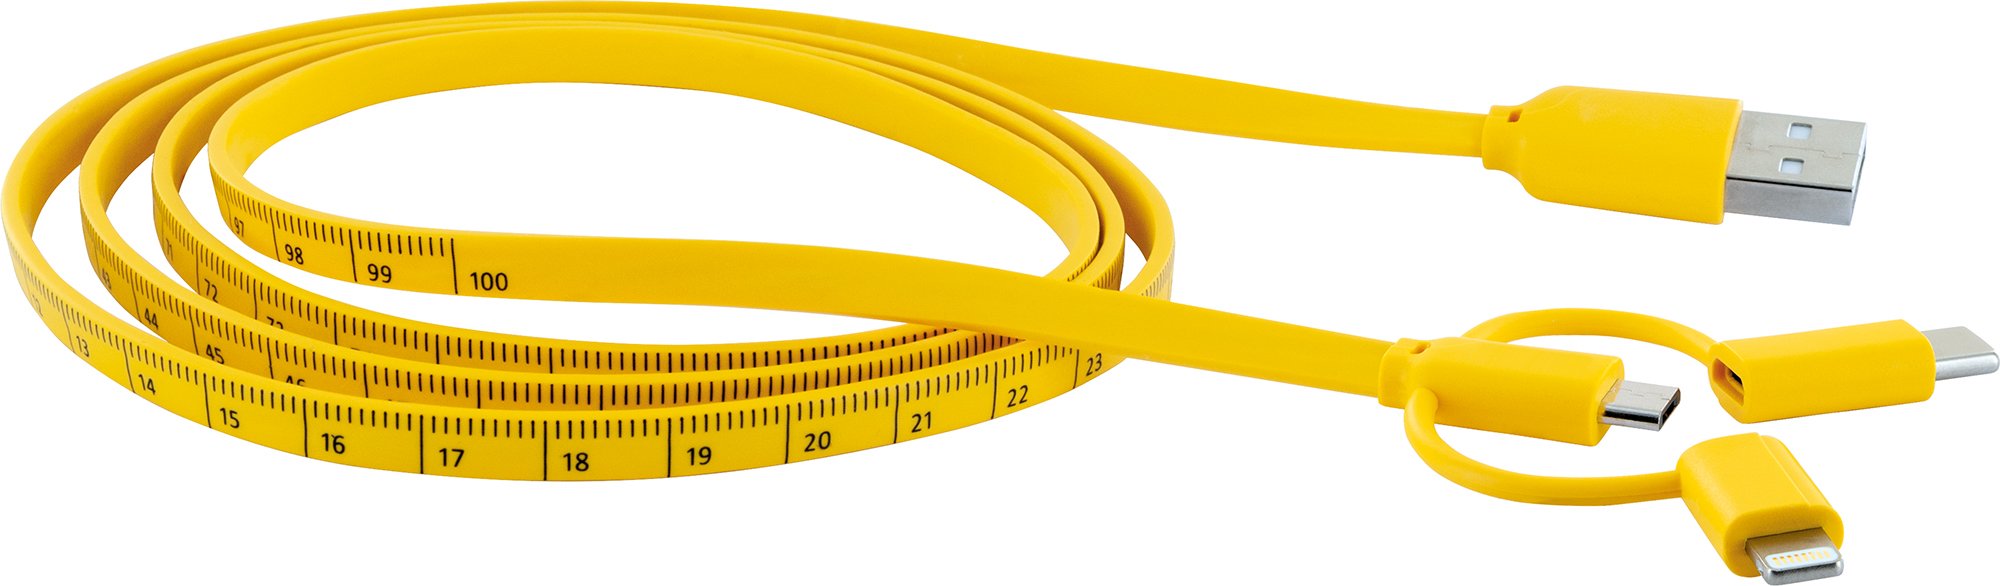 3-in-1 sync & charging cable with tape measure